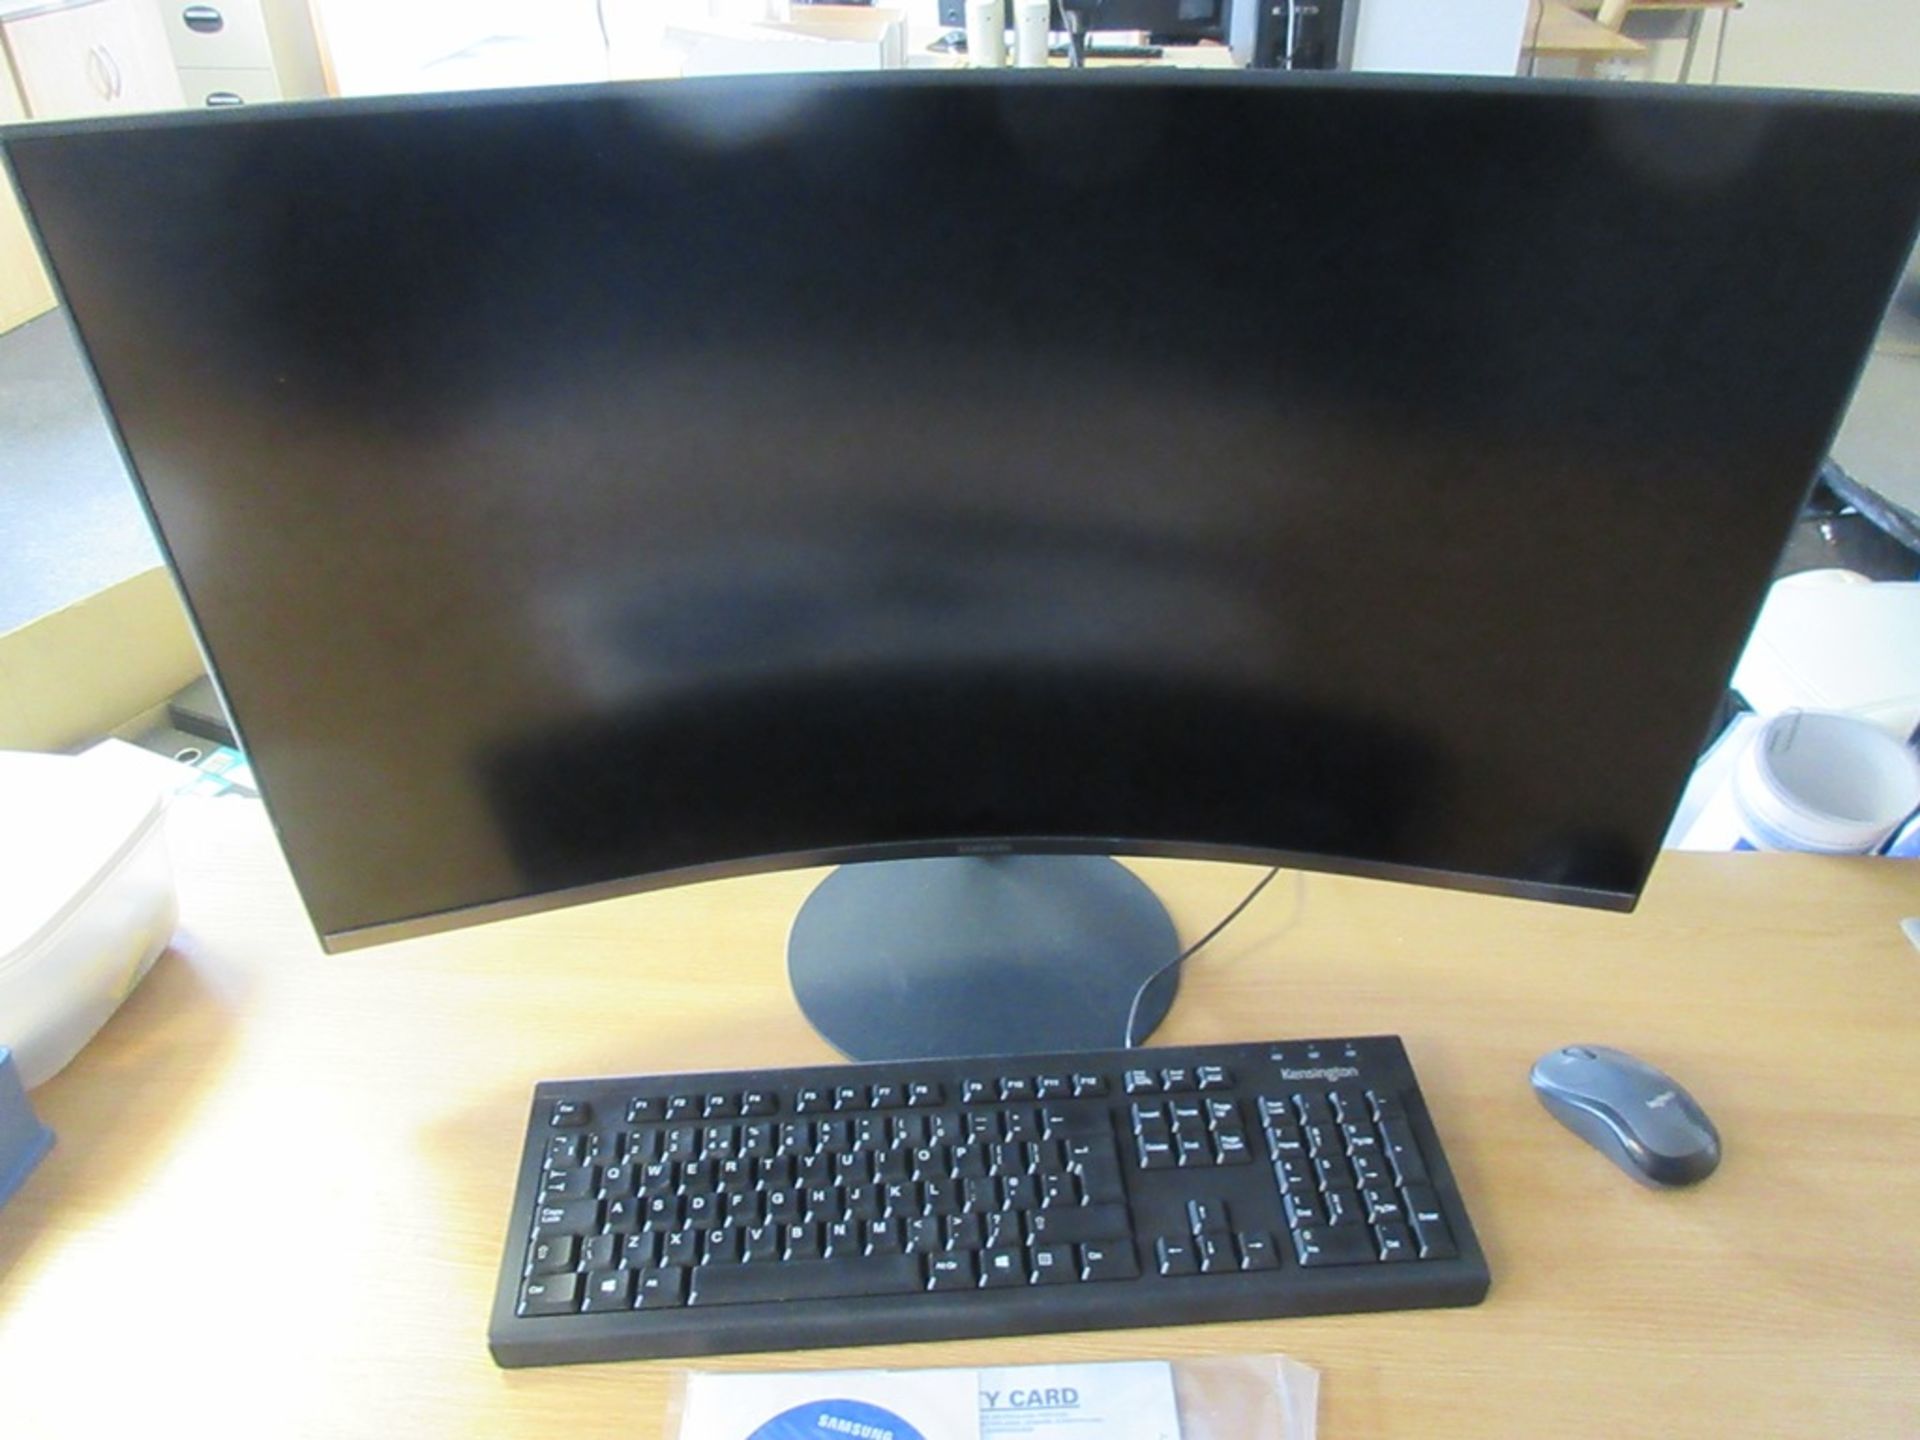 Dell Core i5 Computer system with Samsung curved screen, keyboard, mouse - Image 2 of 3